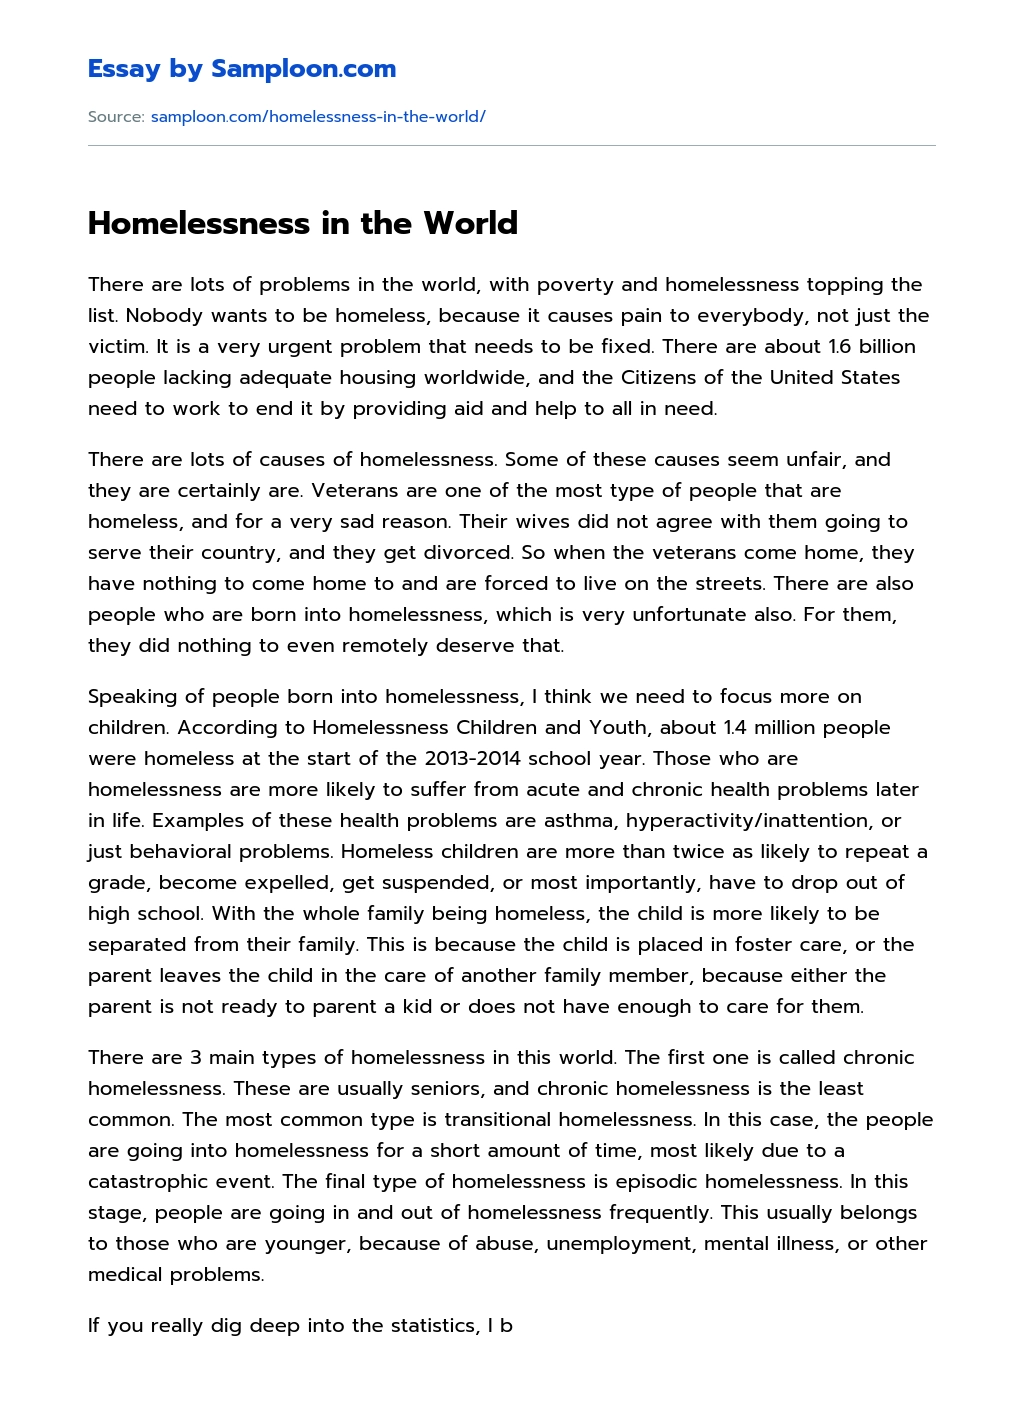 homelessness essay cause and effect